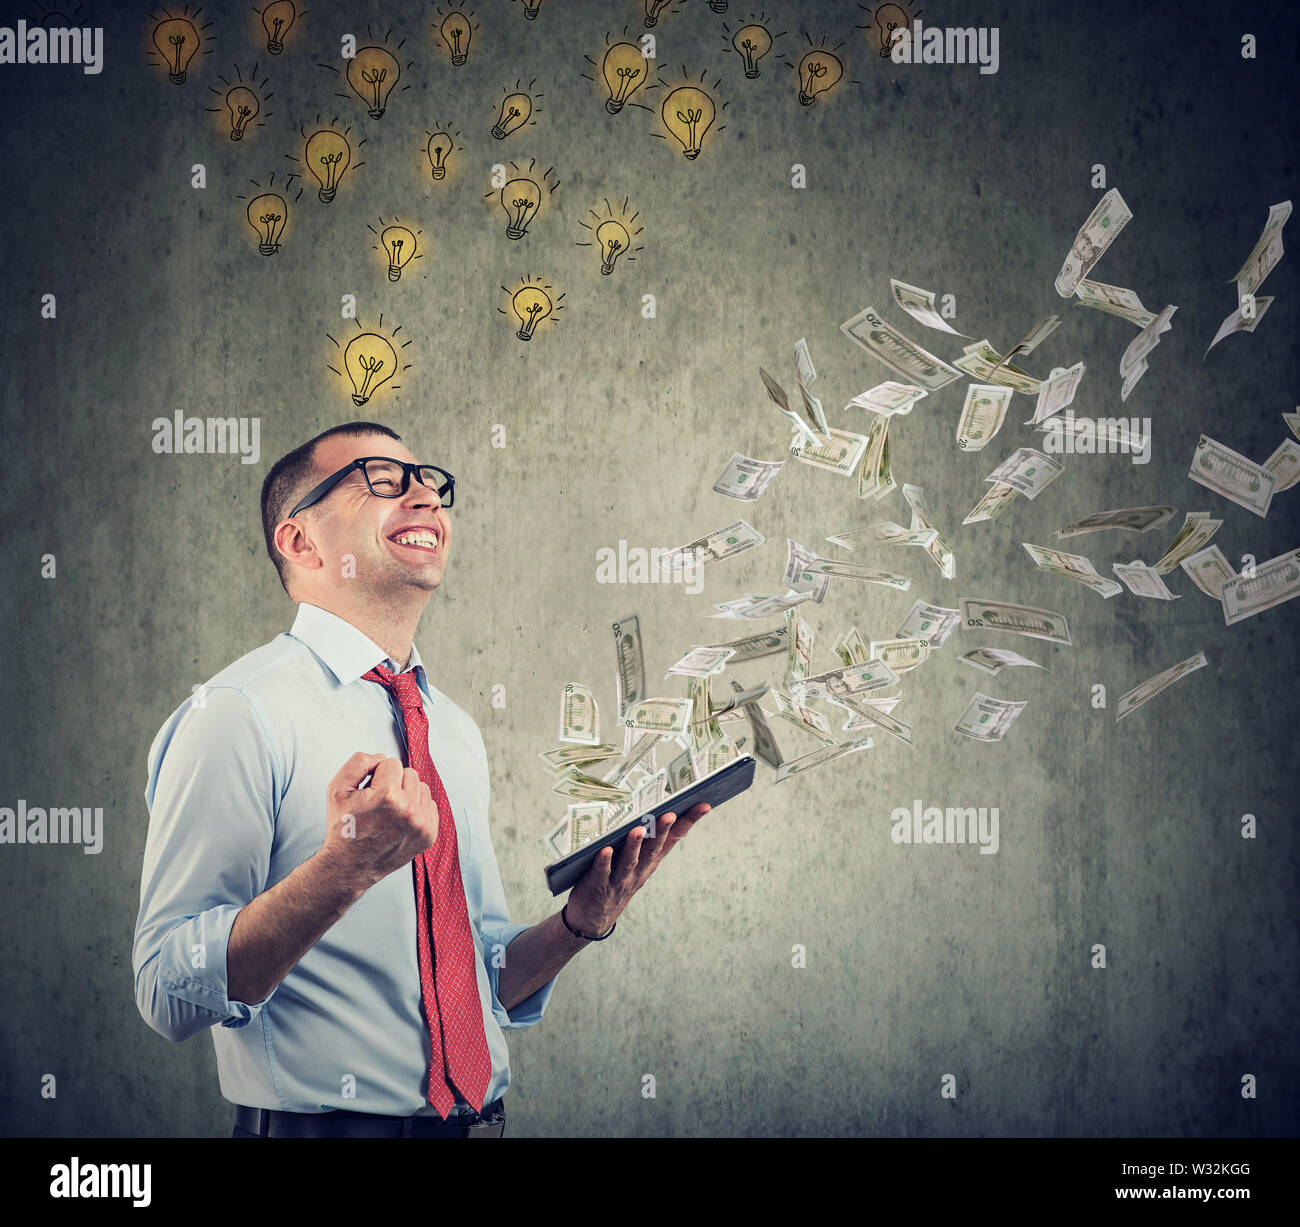 Businessman with bright ideas and tablet building successful online business earning money dollar bills cash falling down. Stock Photo